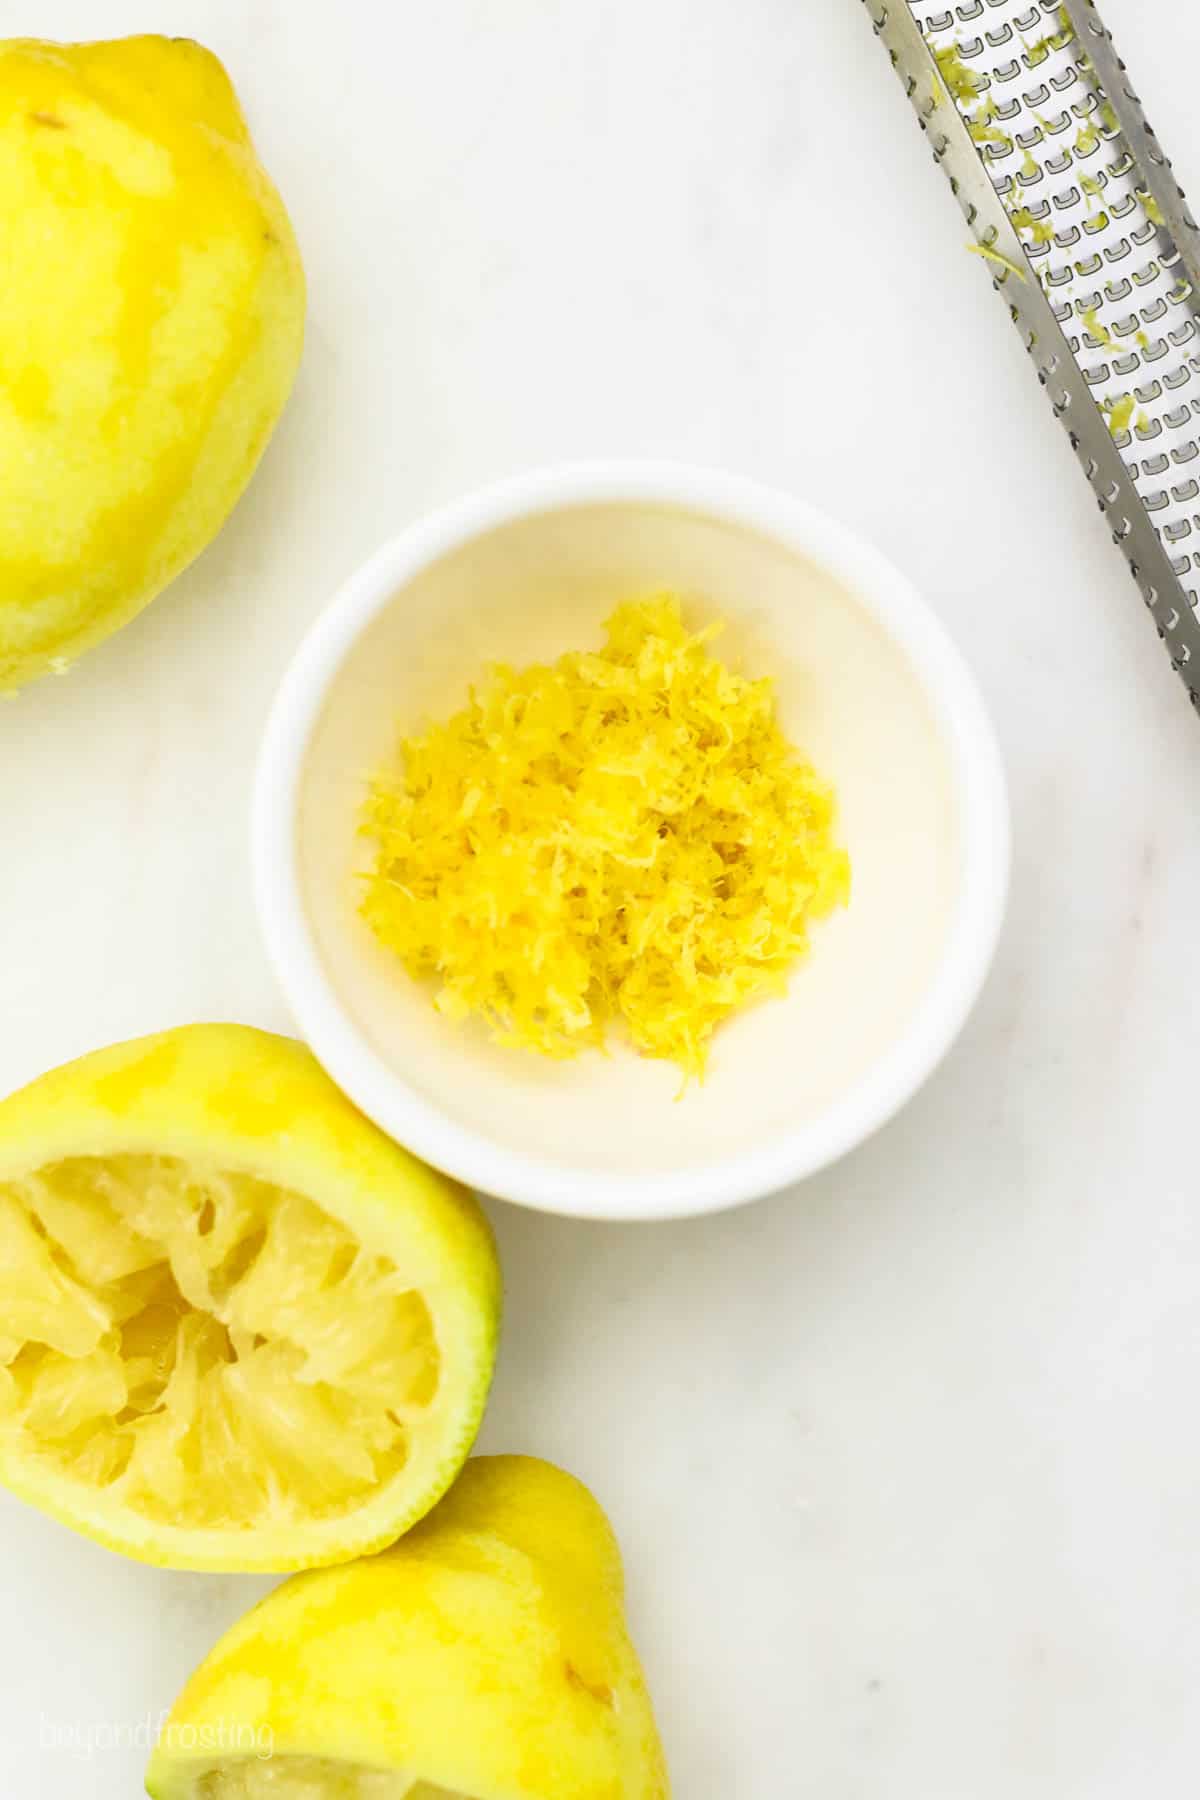 A small white bowl with lemon zest next to a lemon and a microplane grater